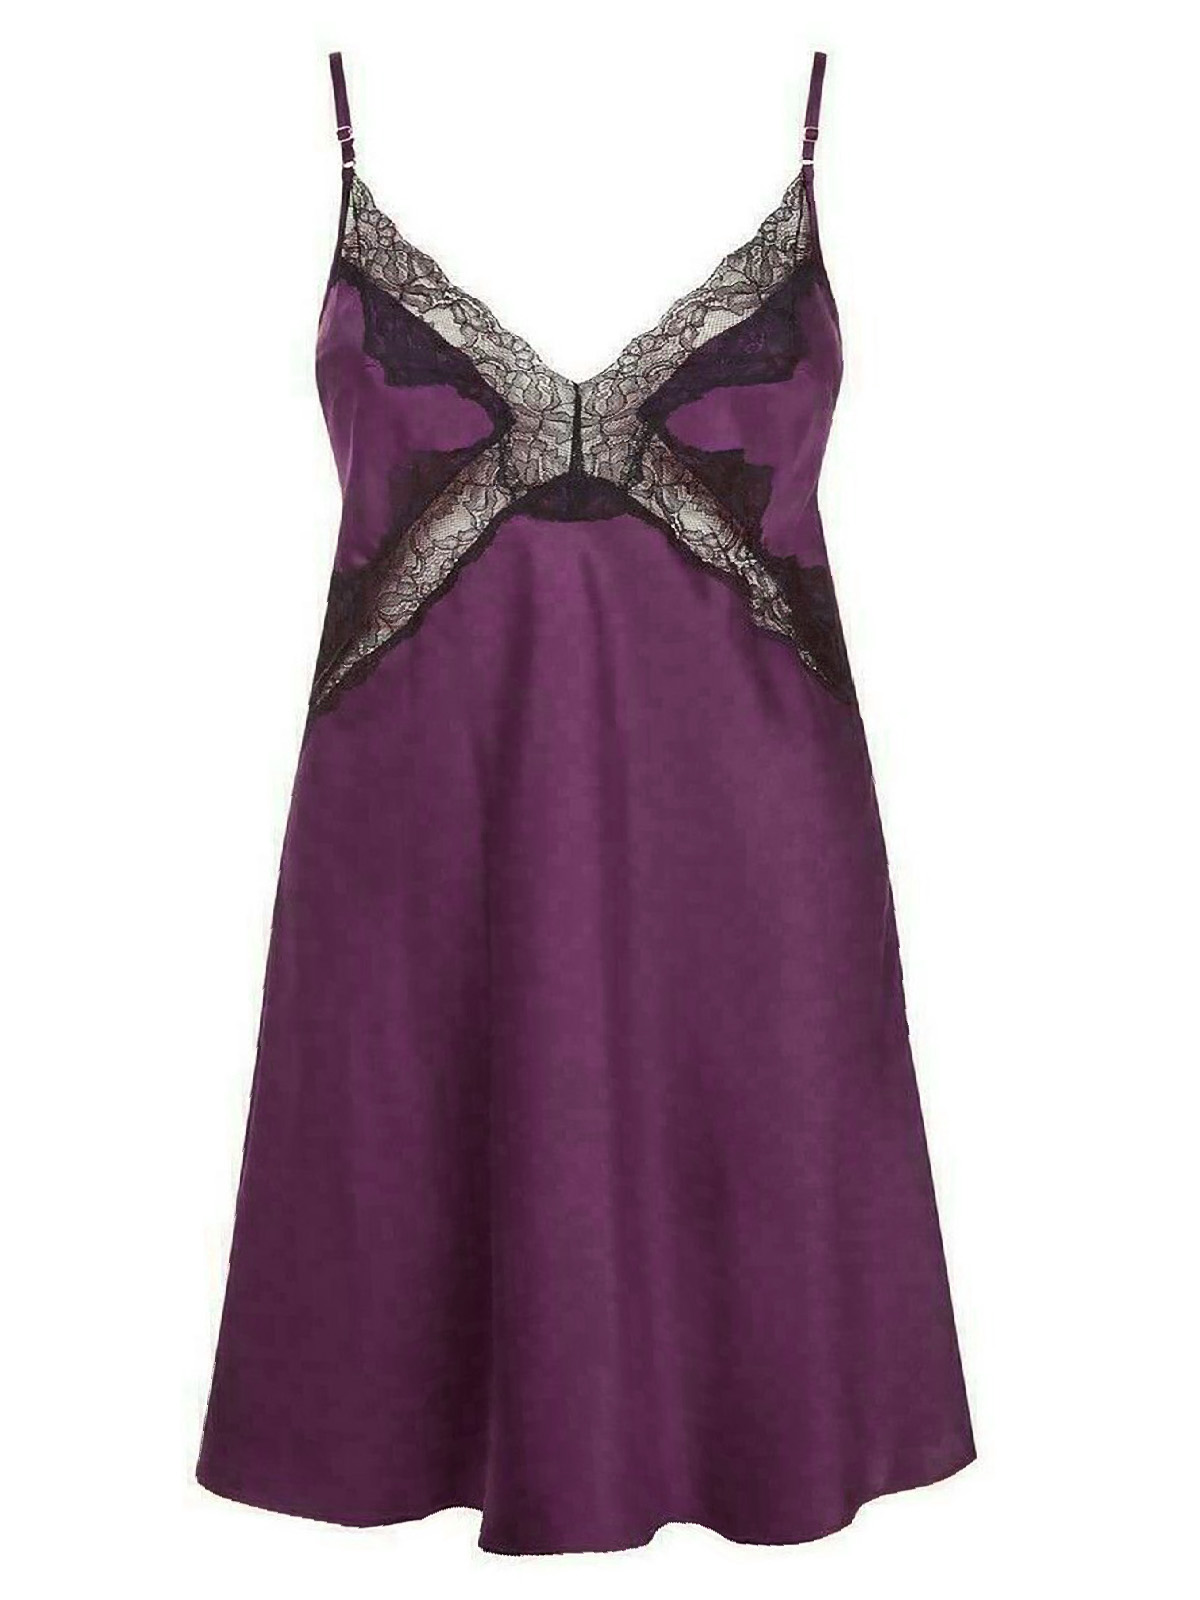 Ann Summers - - Ann Summers AUBERGINE Sierra Lace Chemise - Size XS to L